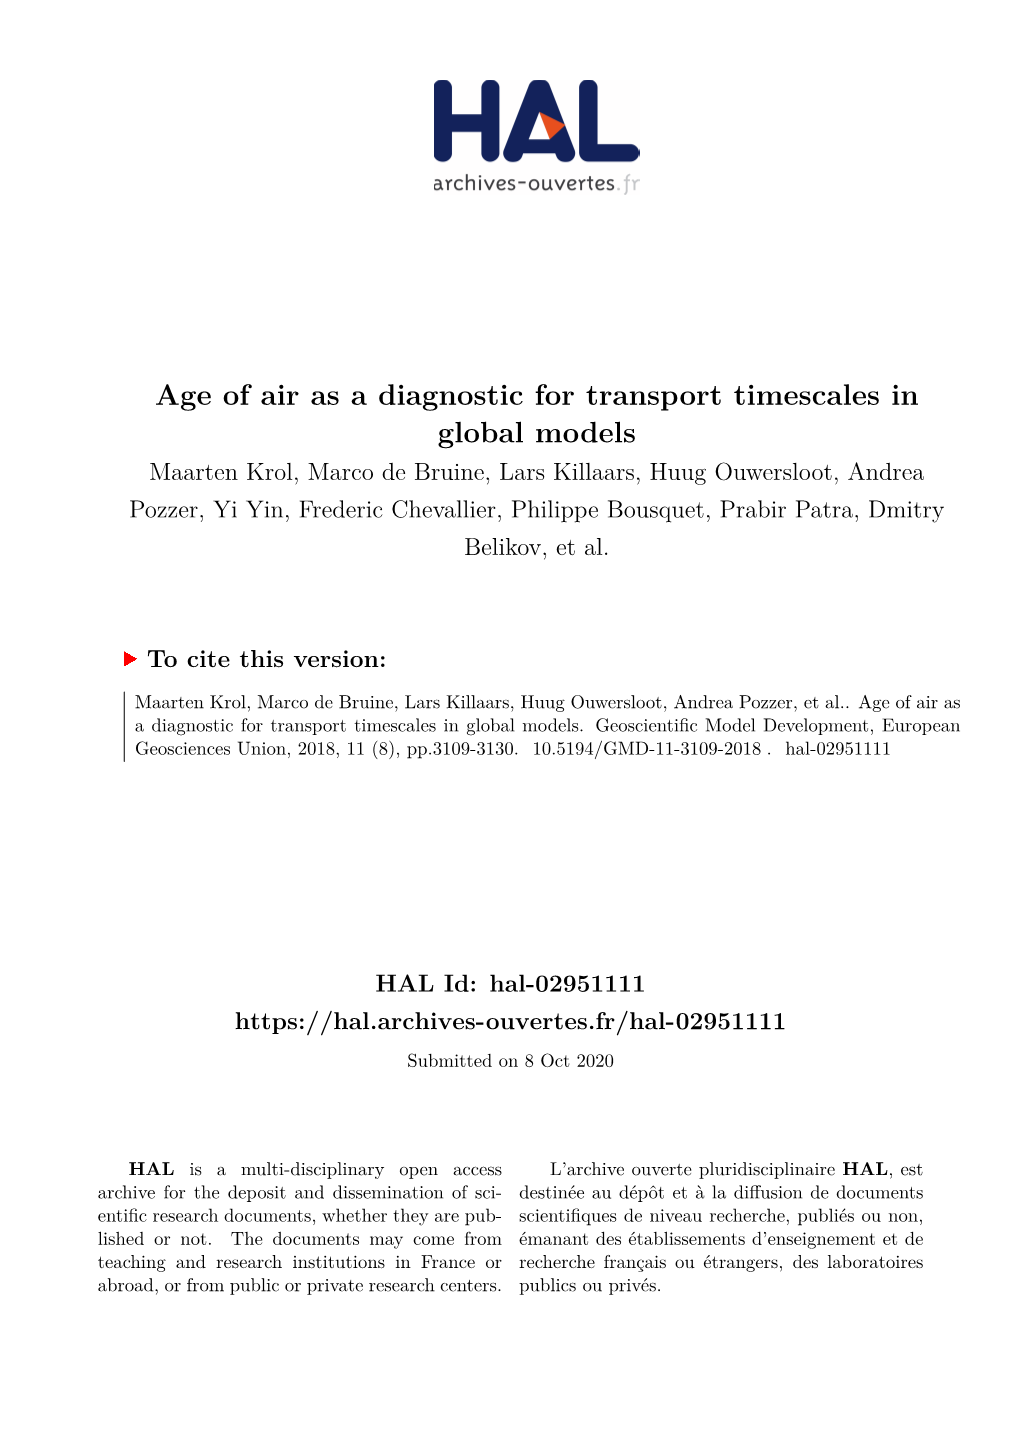 Age of Air As a Diagnostic for Transport Timescales in Global Models